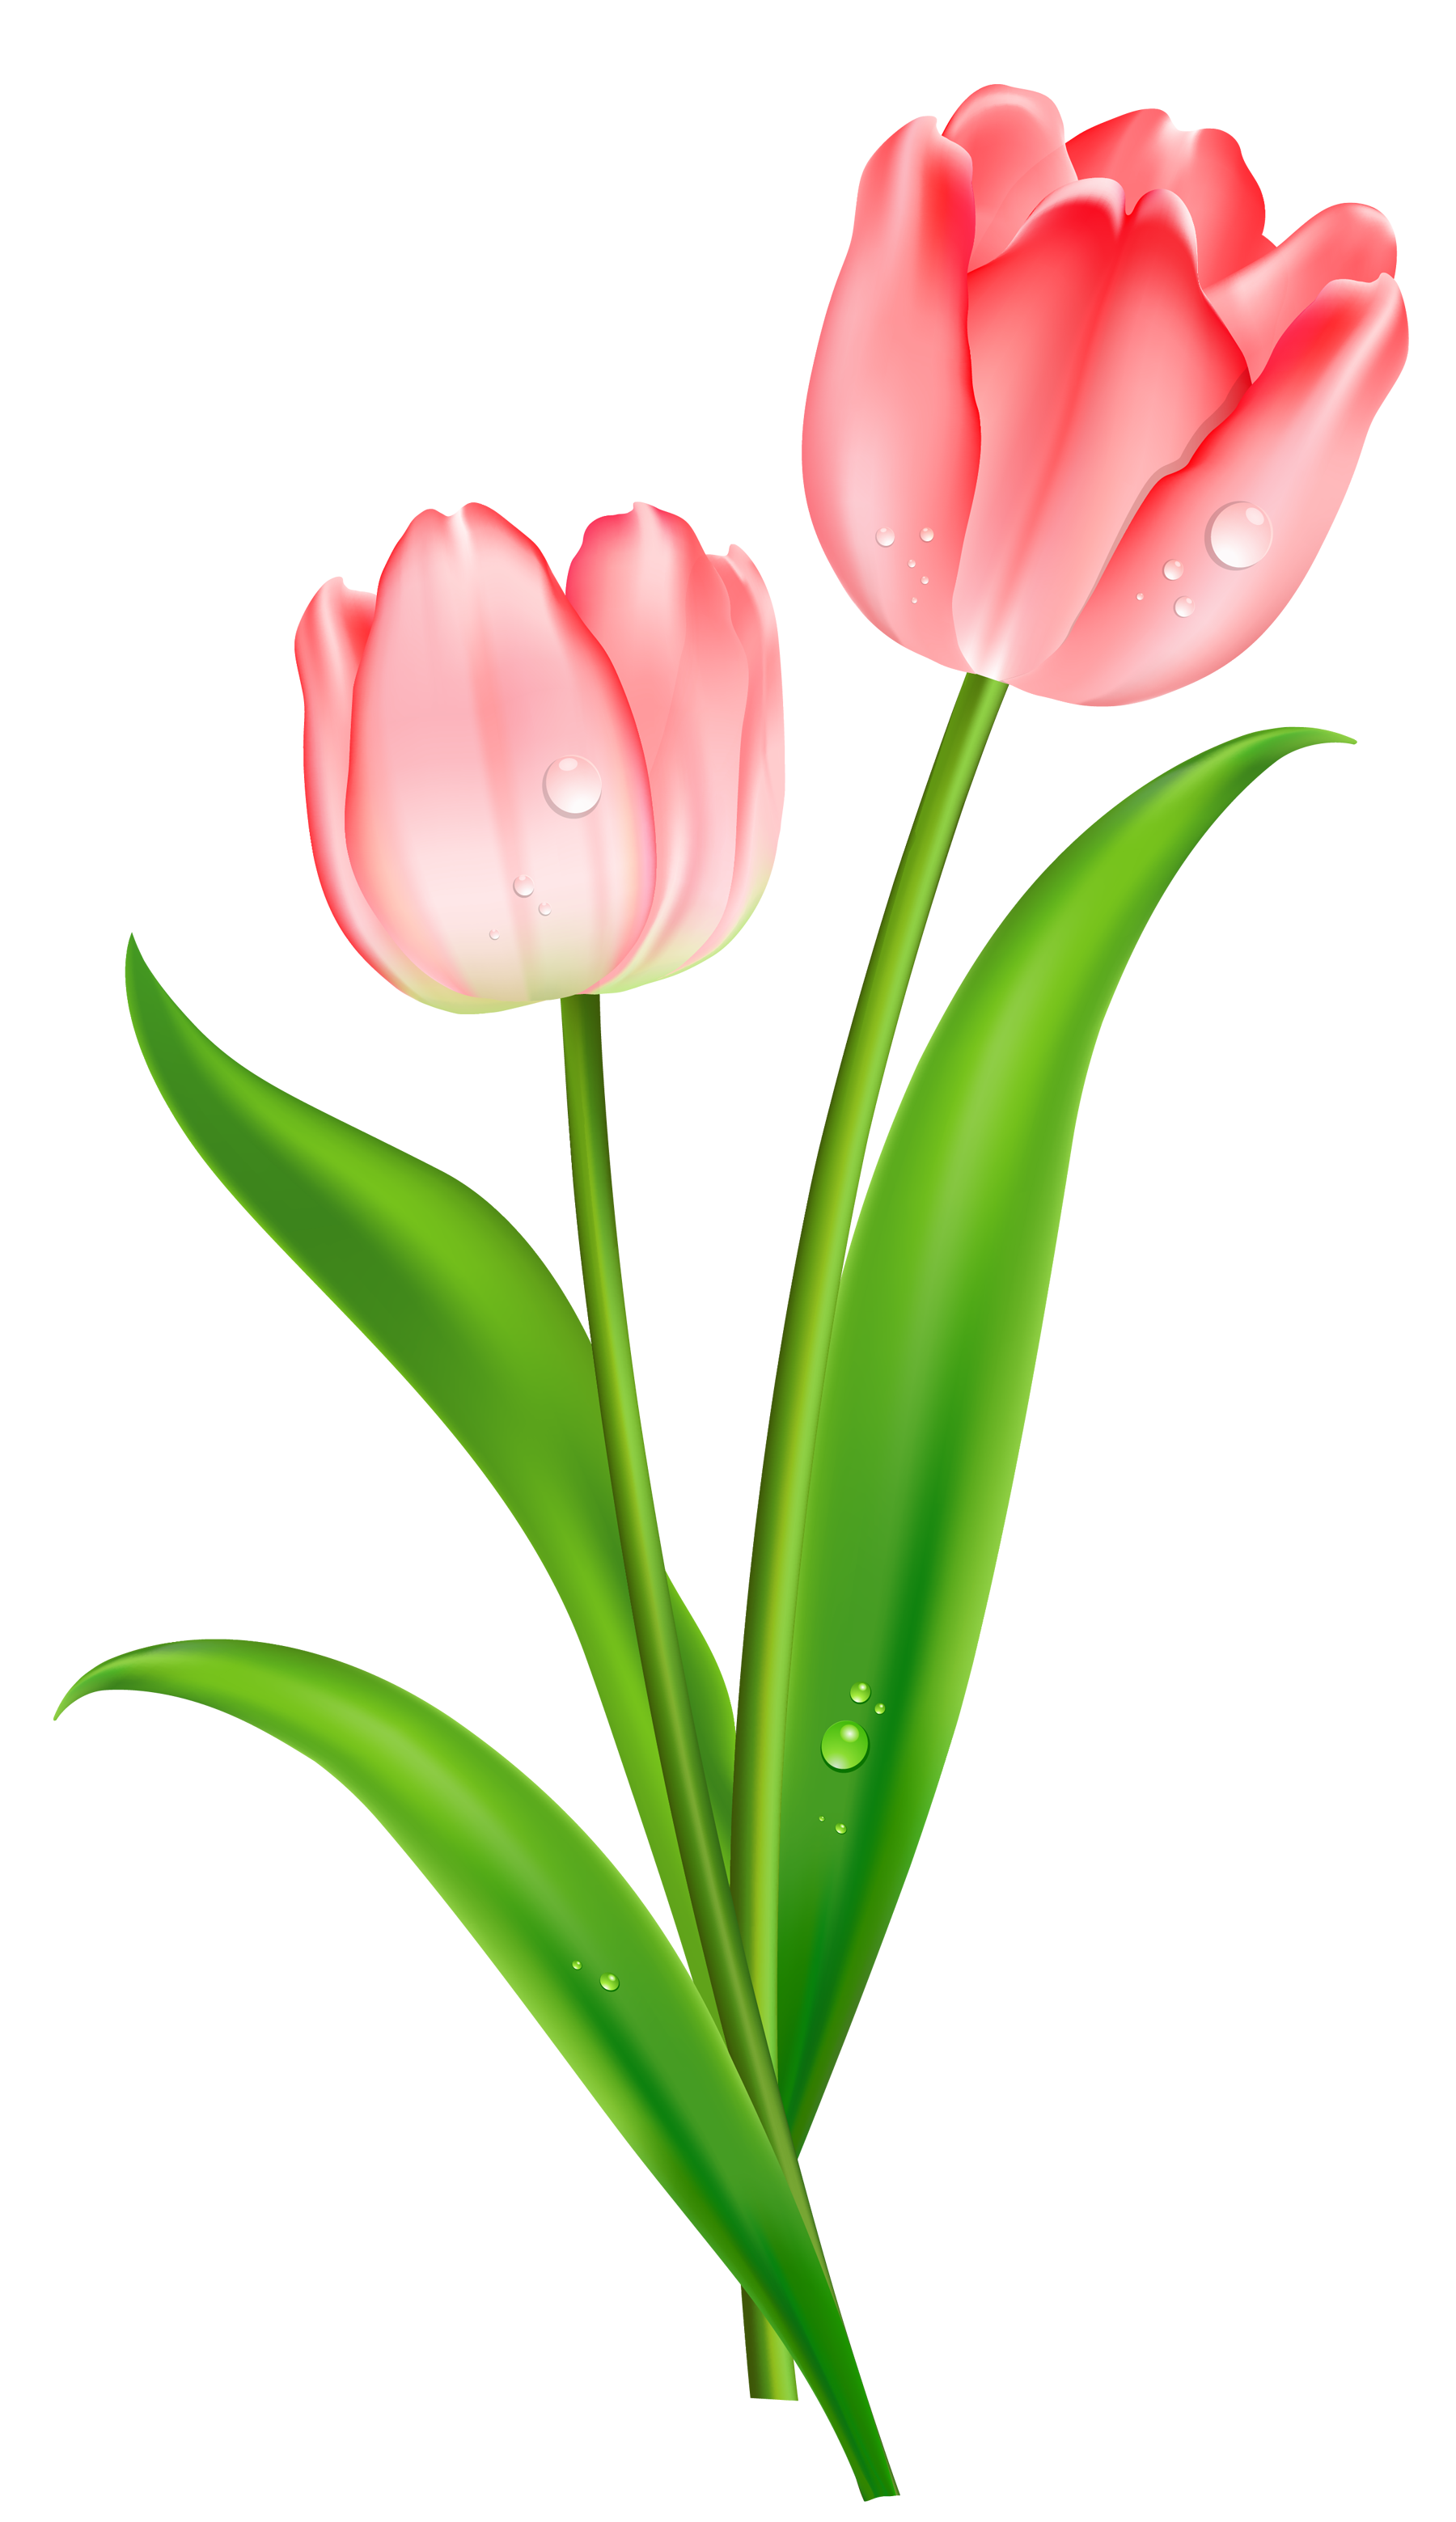 Outline clipart tulip. Png images free from